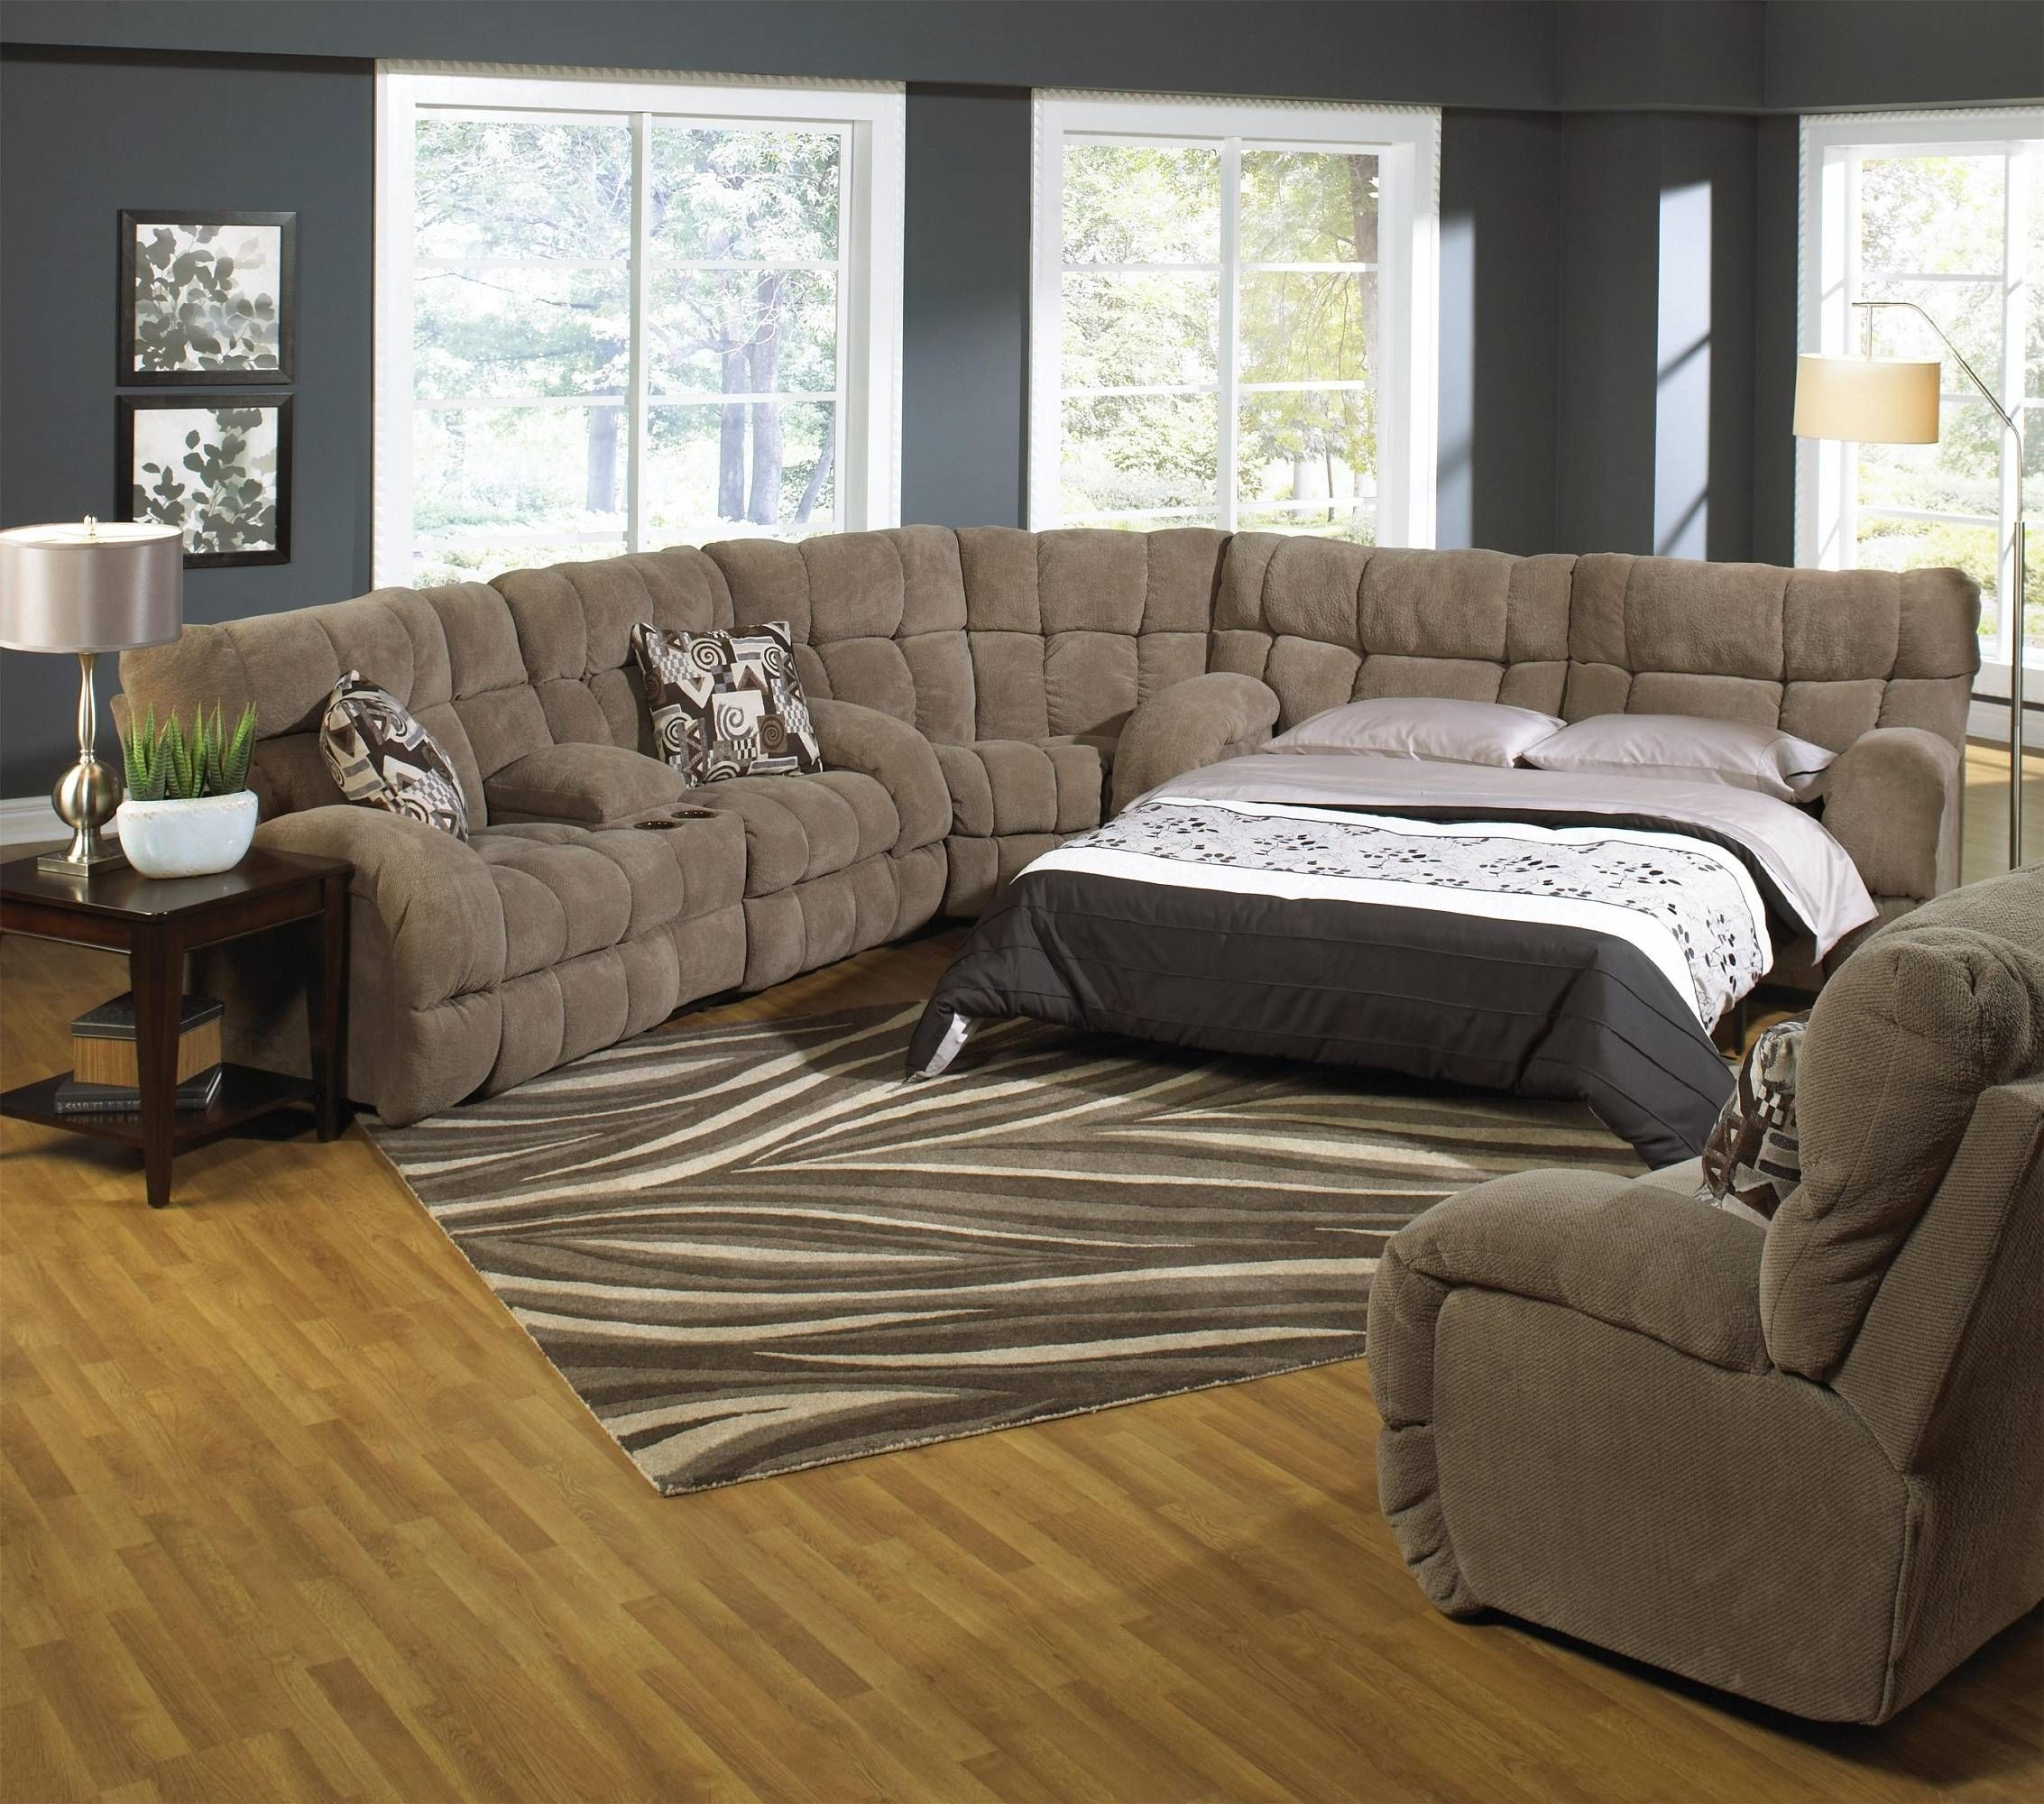 Traditional Style Queen Sofa Bed Sectional Innovation Living Brand Intended For Queen Sleeper Sofa Sheets (View 14 of 15)